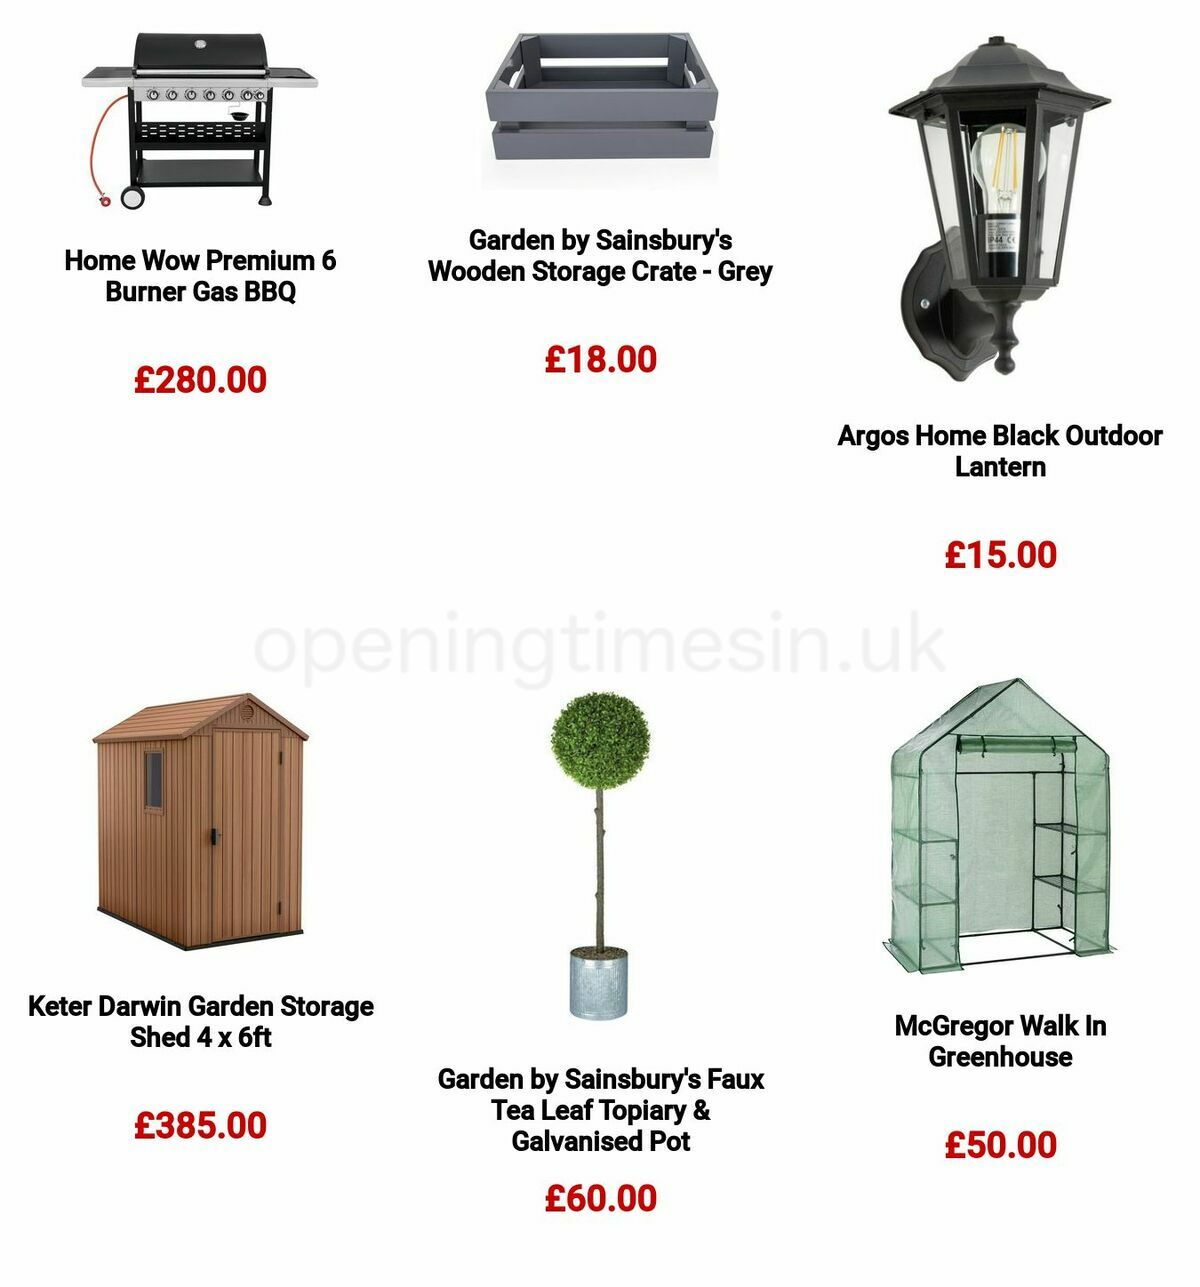 Argos Offers from 6 March